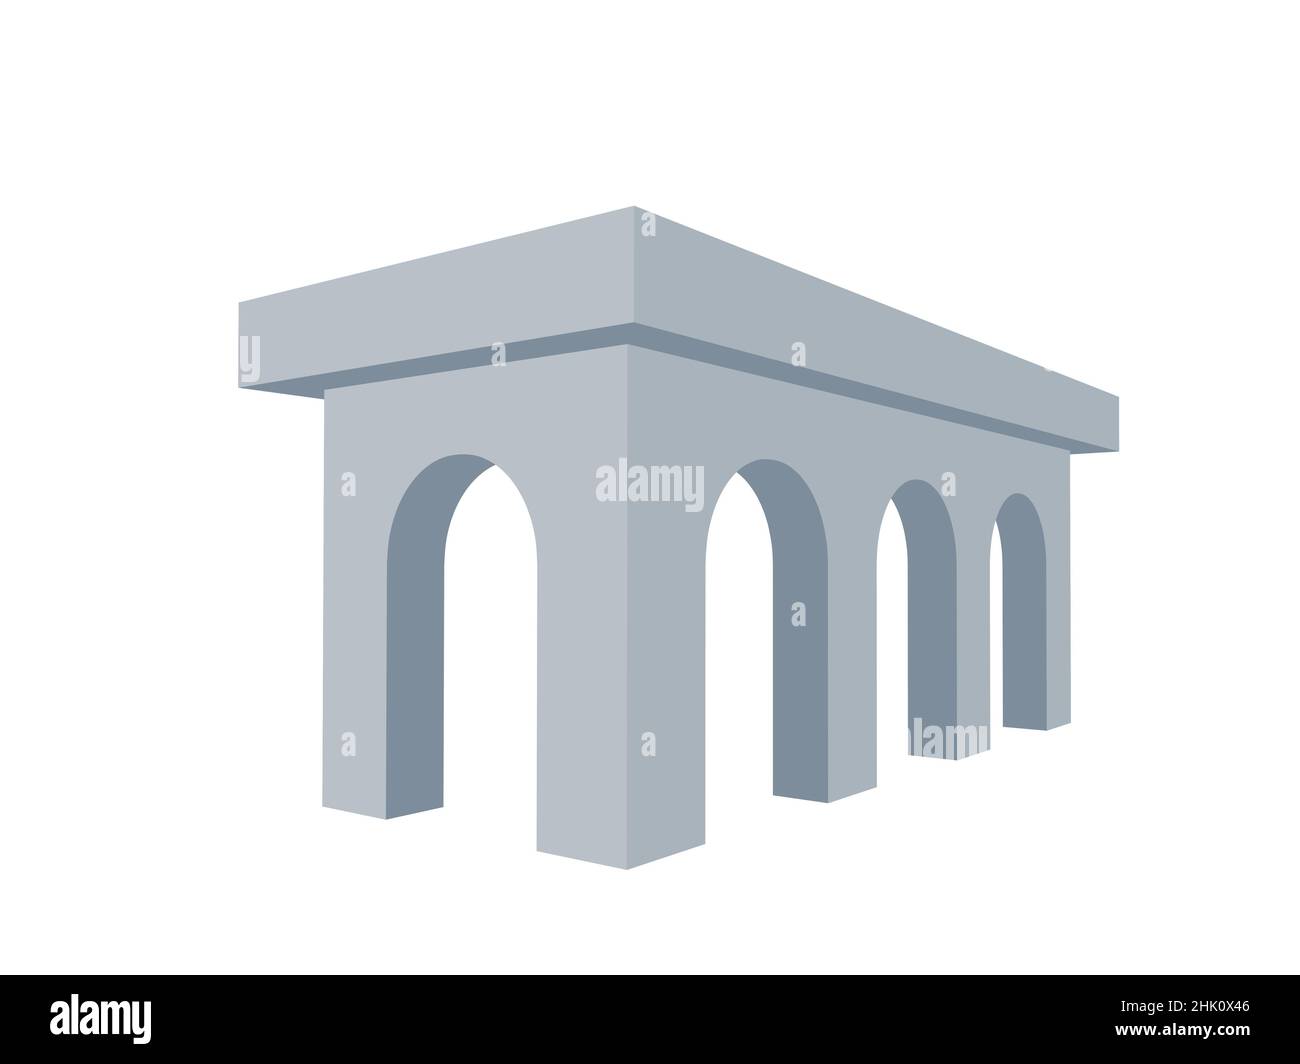 arches in perspective, 3d model of a simple architectural design Stock Photo